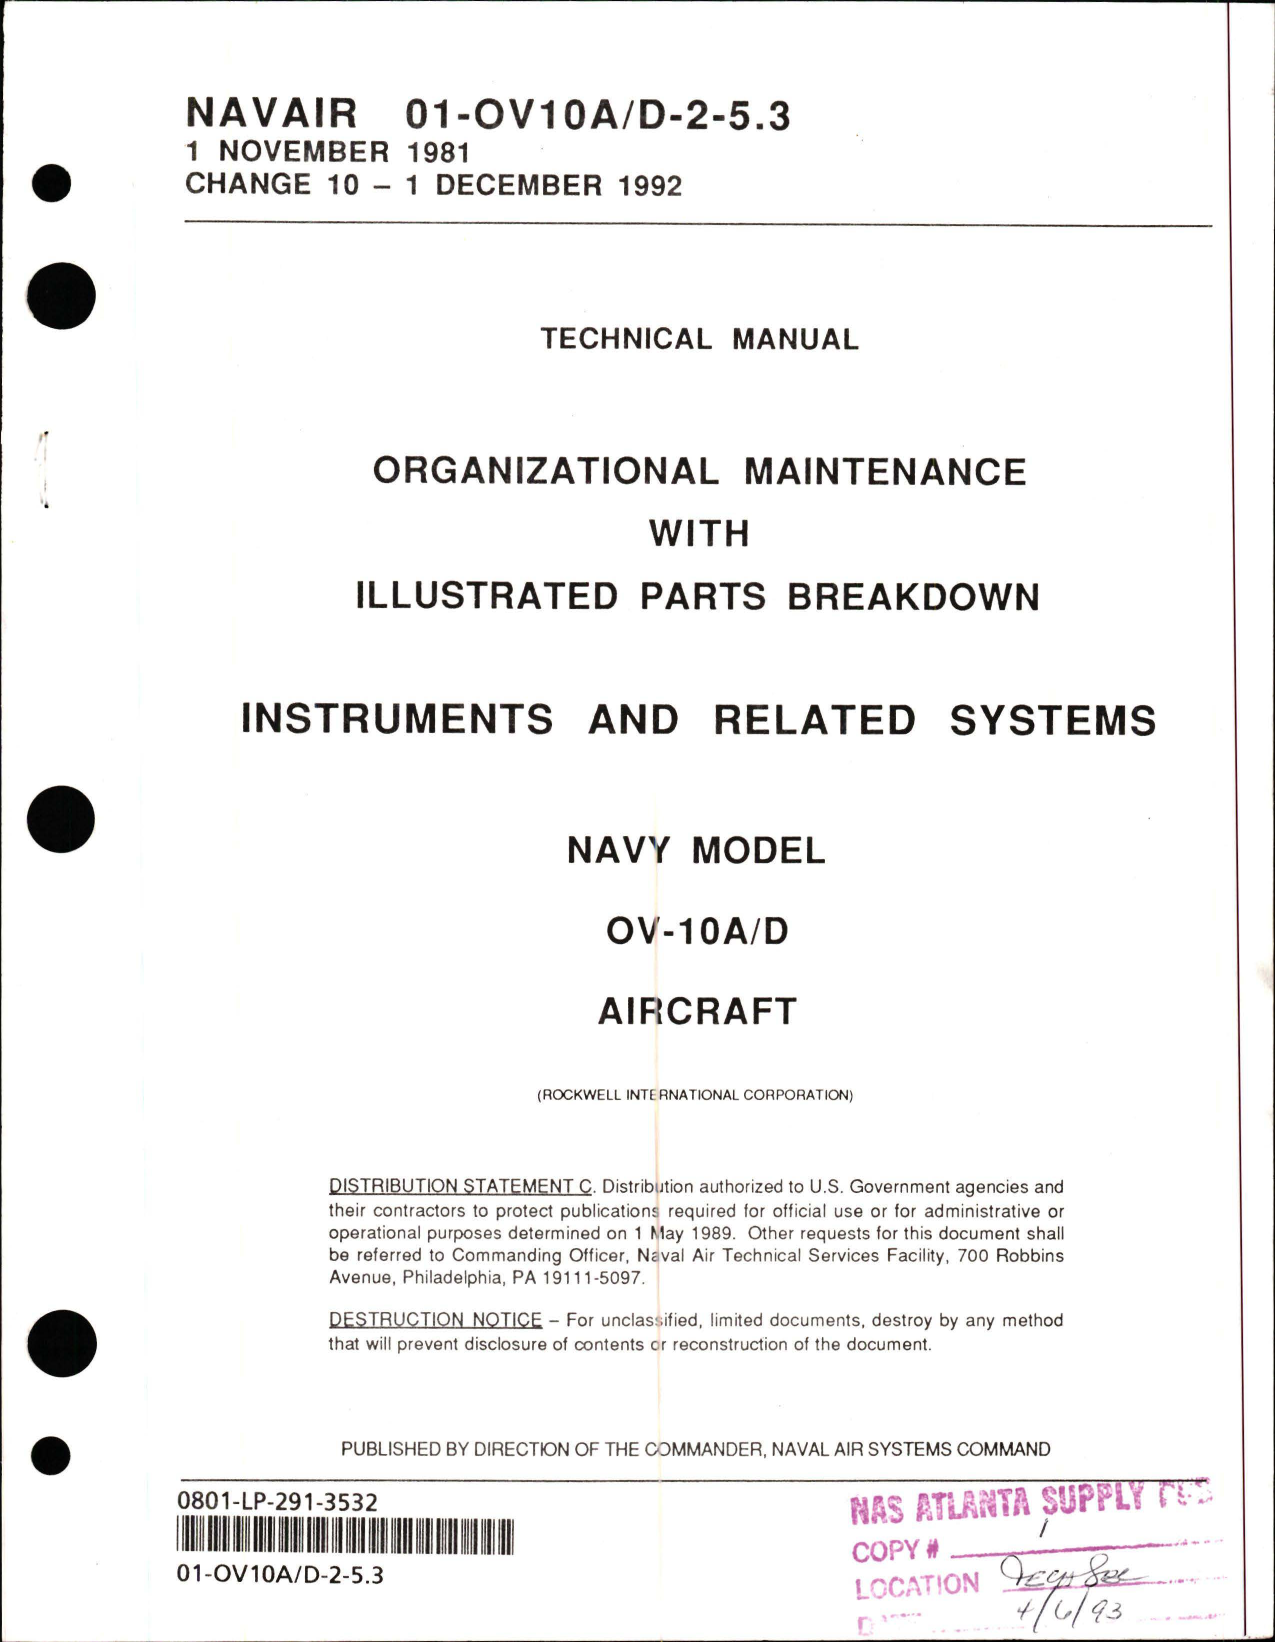 Sample page 1 from AirCorps Library document: Organizational Maintenance with Illustrated Parts Breakdown for Instruments and Related Systems for OV-10A/D